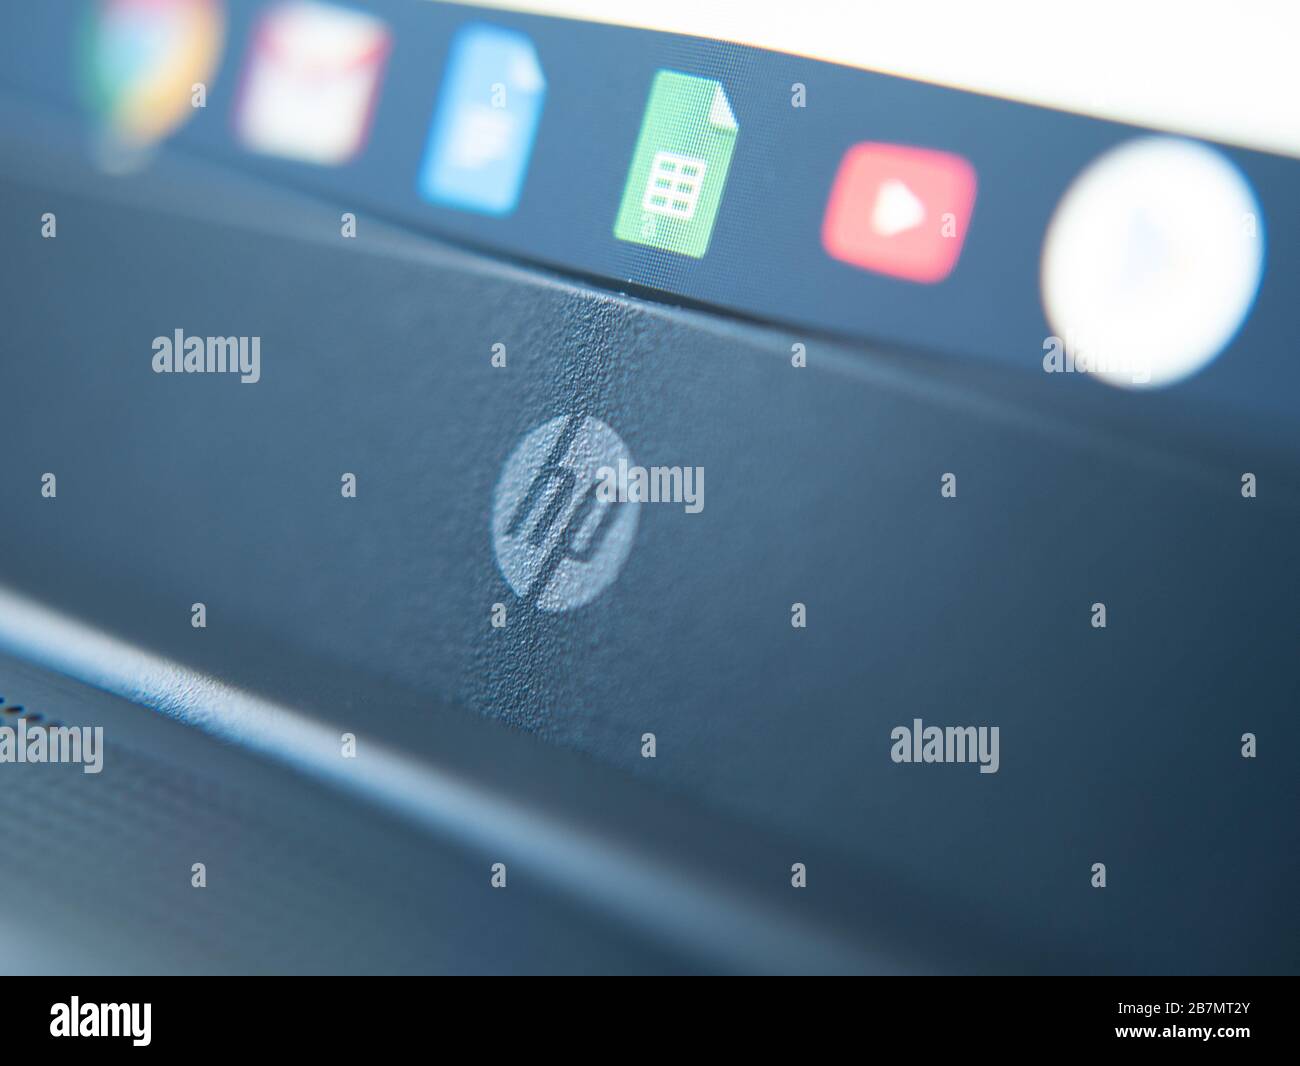 March 2020, UK: HP hewlett packard logo on laptop close up chromebook chrome os with google apps Stock Photo